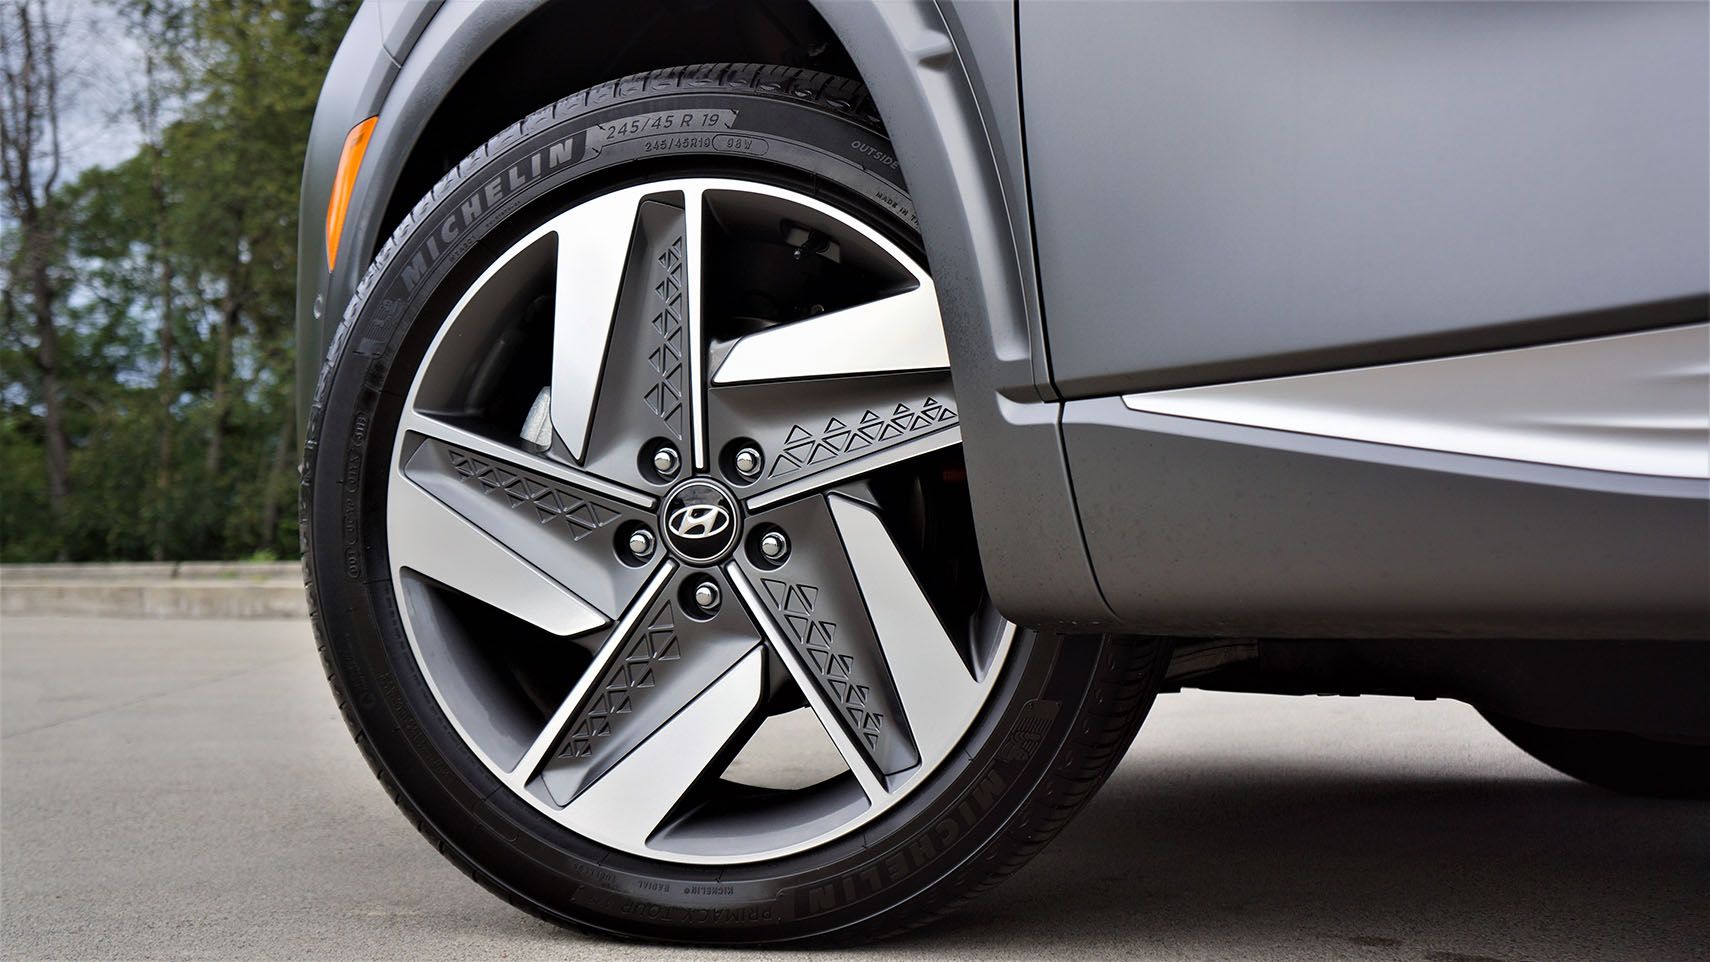 The Nexo's 19-inch alloys help to provide excellent handling.